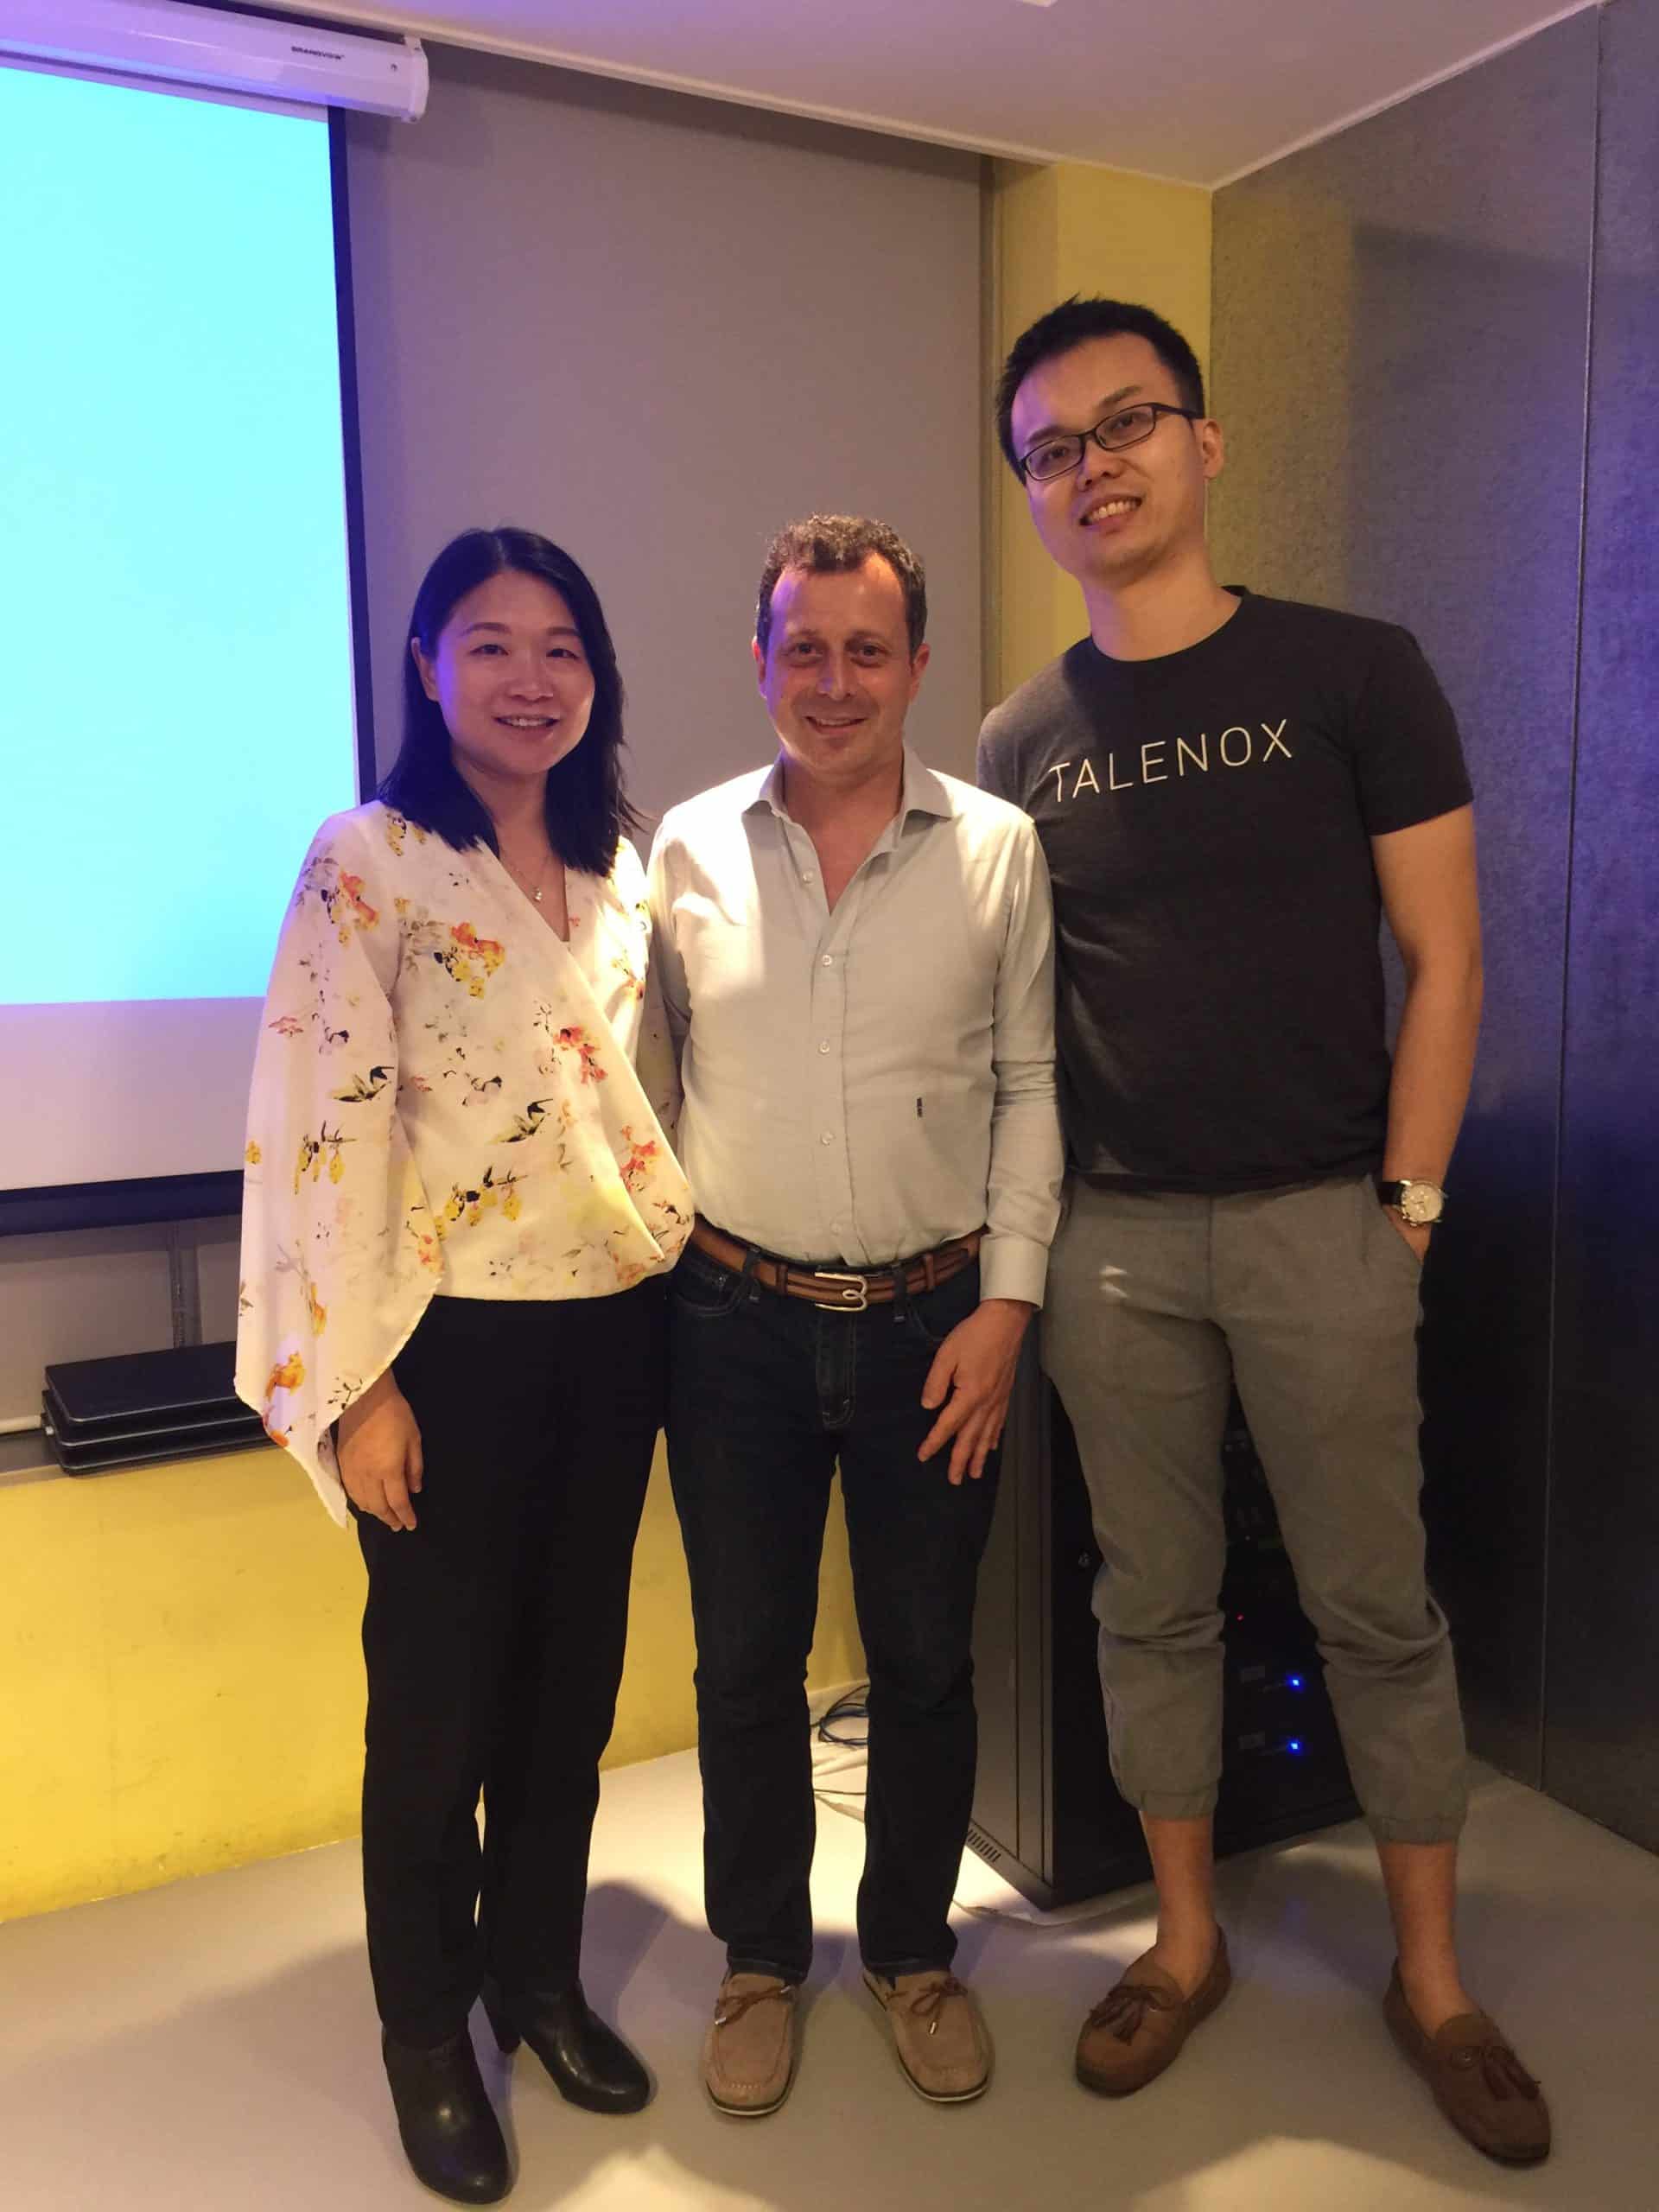 From left to right: Cindy Chui (FastLane HR), David Rosa (Neat) and Gordon Ng (Talenox)